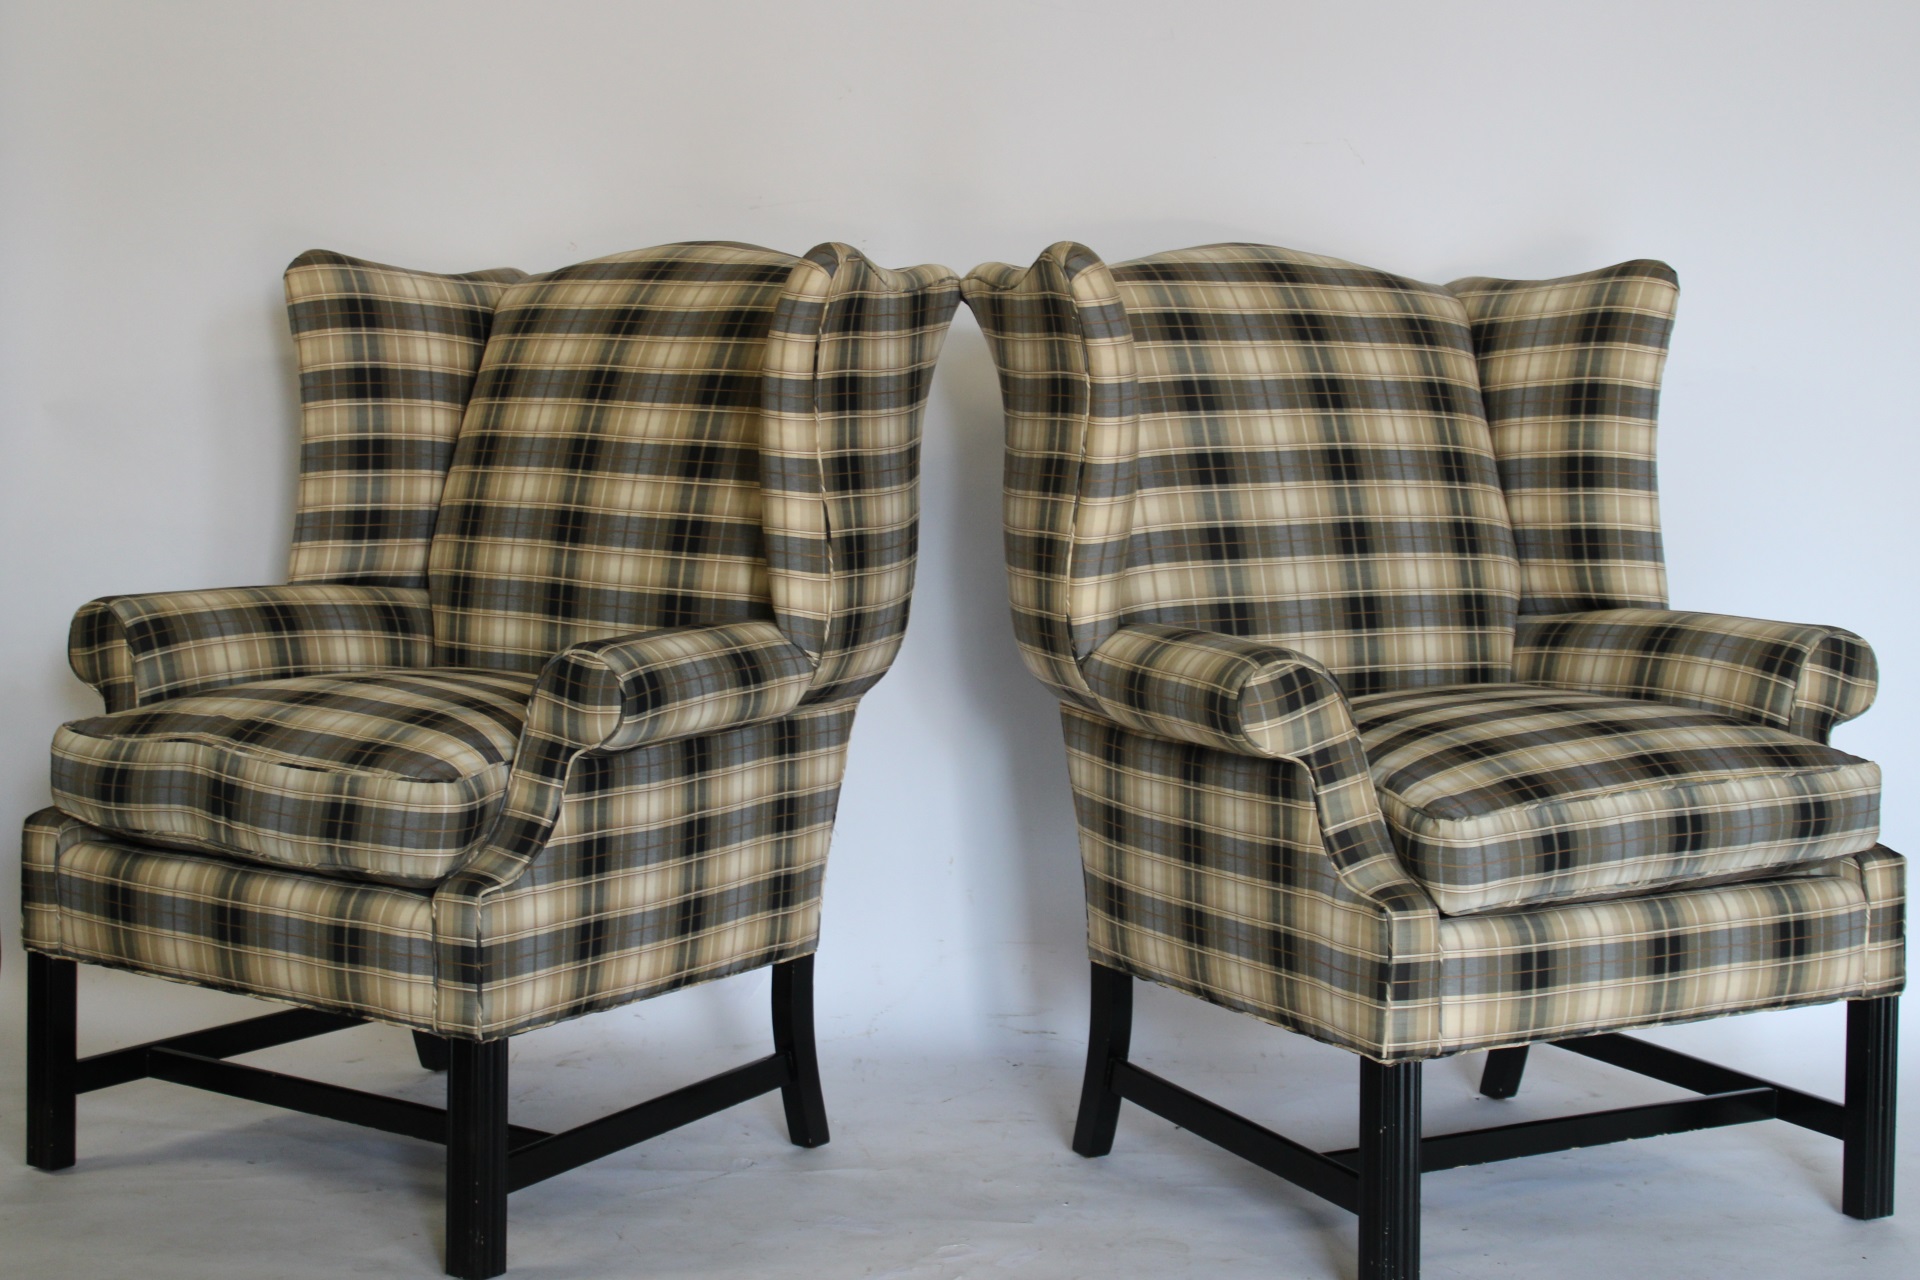 A VINTAGE PAIR OF UPHOLSTERED WING 3bcb75